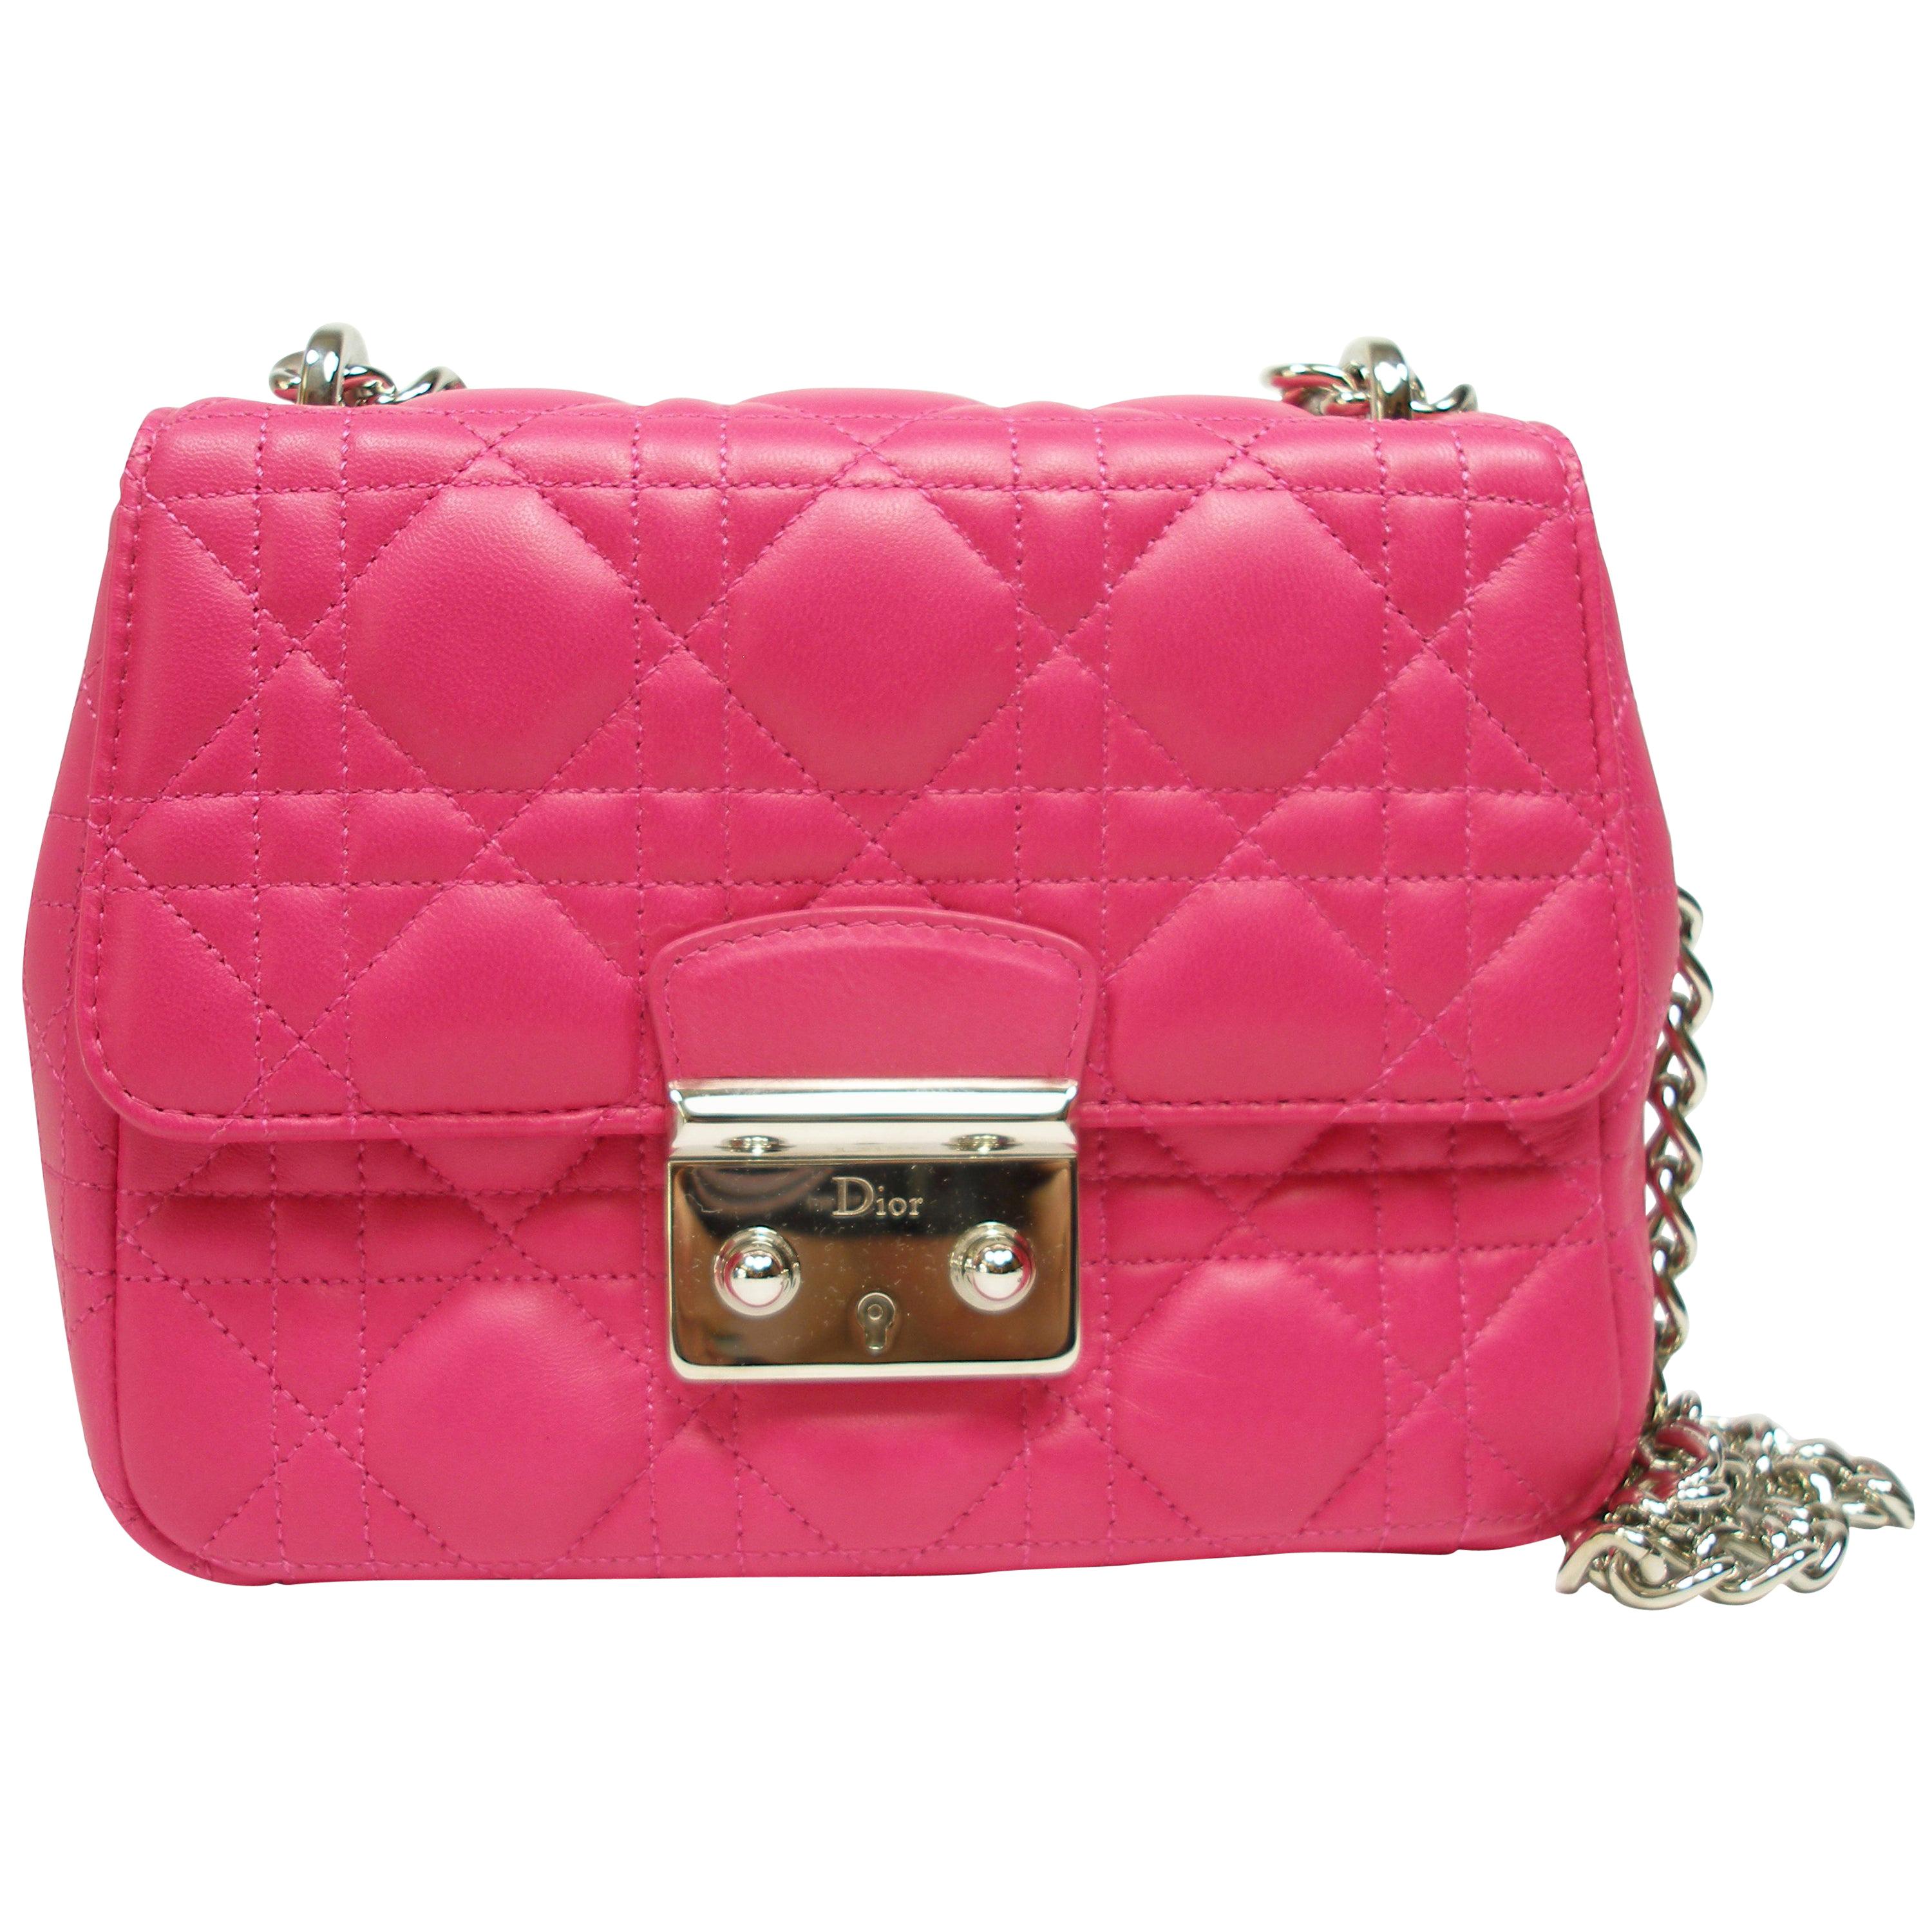 Dior Miss Dior Bag pink cannage Leather Small  Size / BRAND NEW